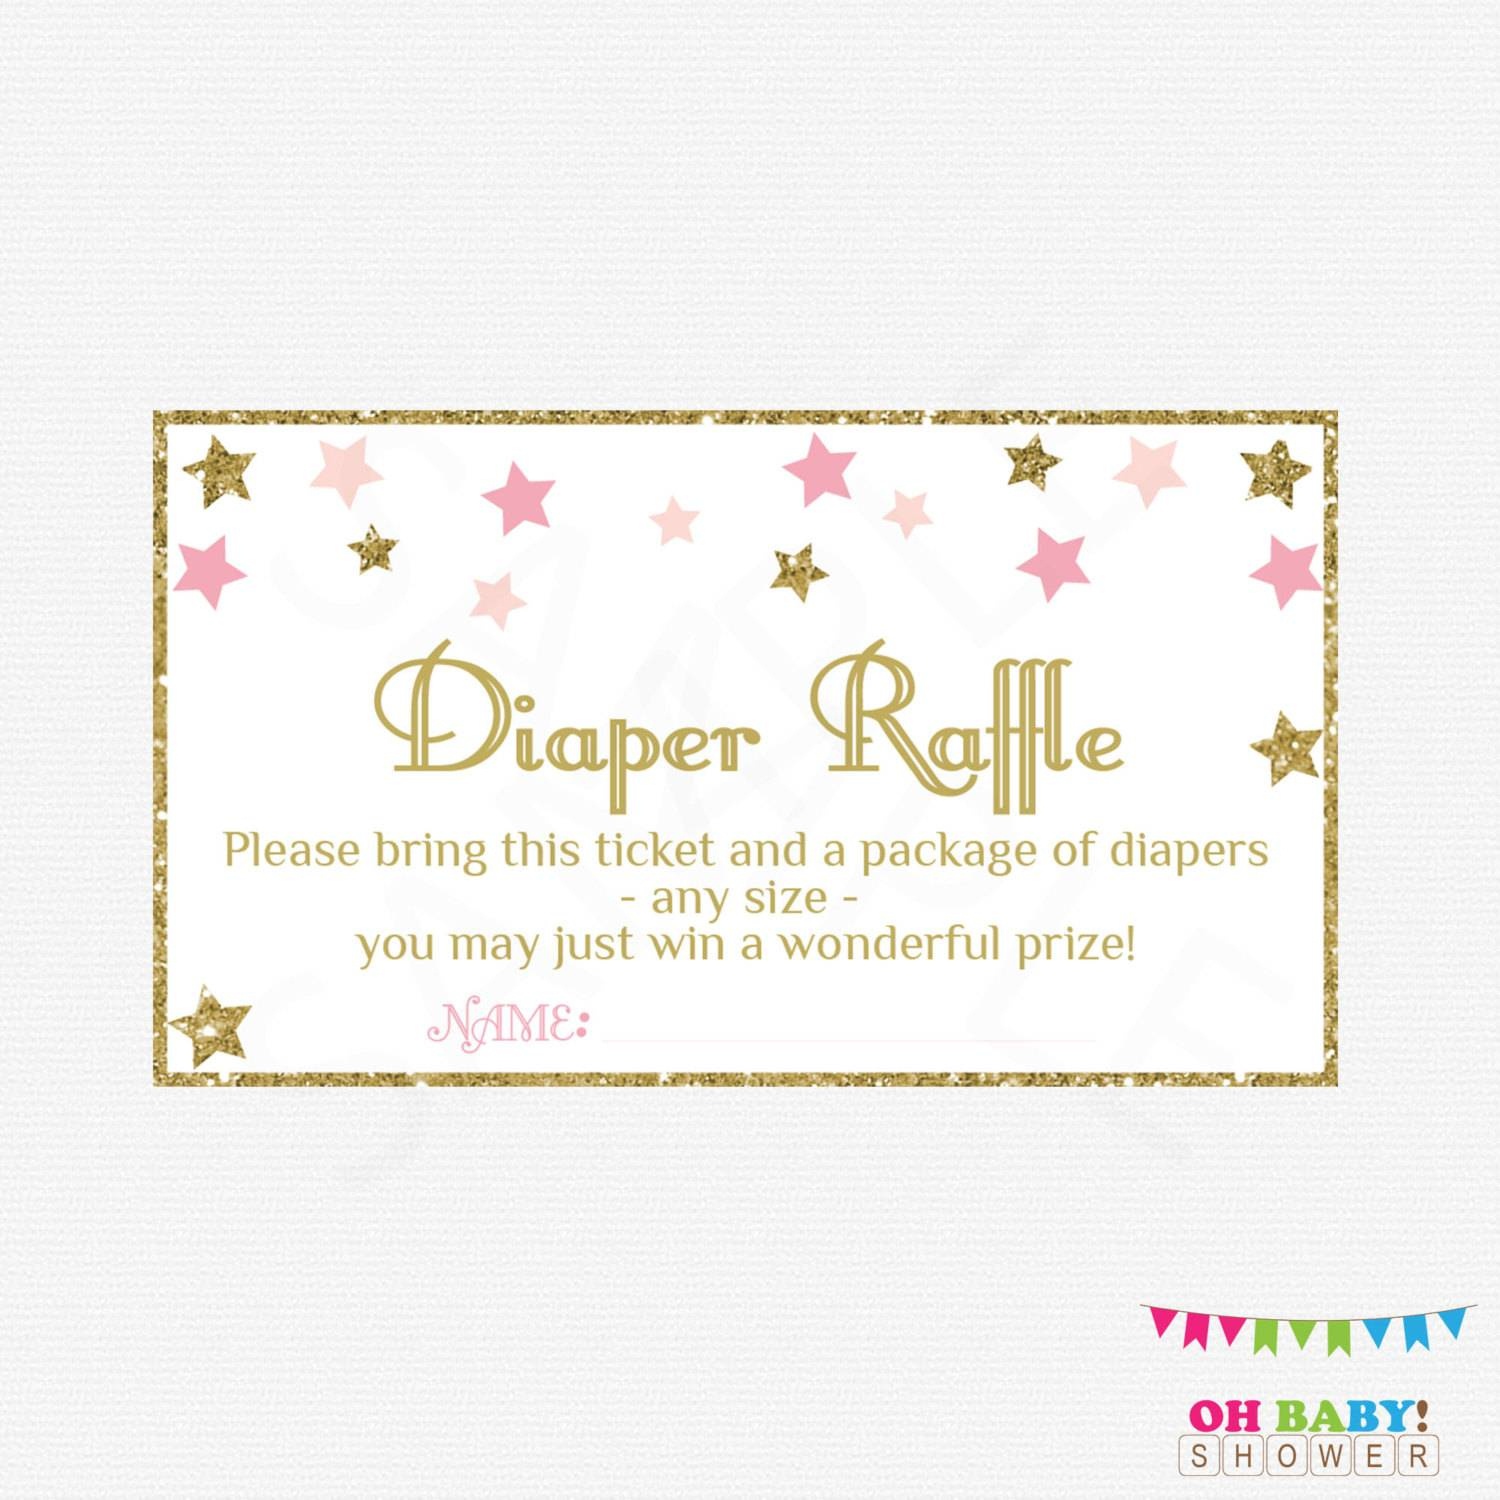 36 Cute Diaper Raffle Tickets | Kittybabylove - Free Printable Diaper Raffle Tickets Elephant